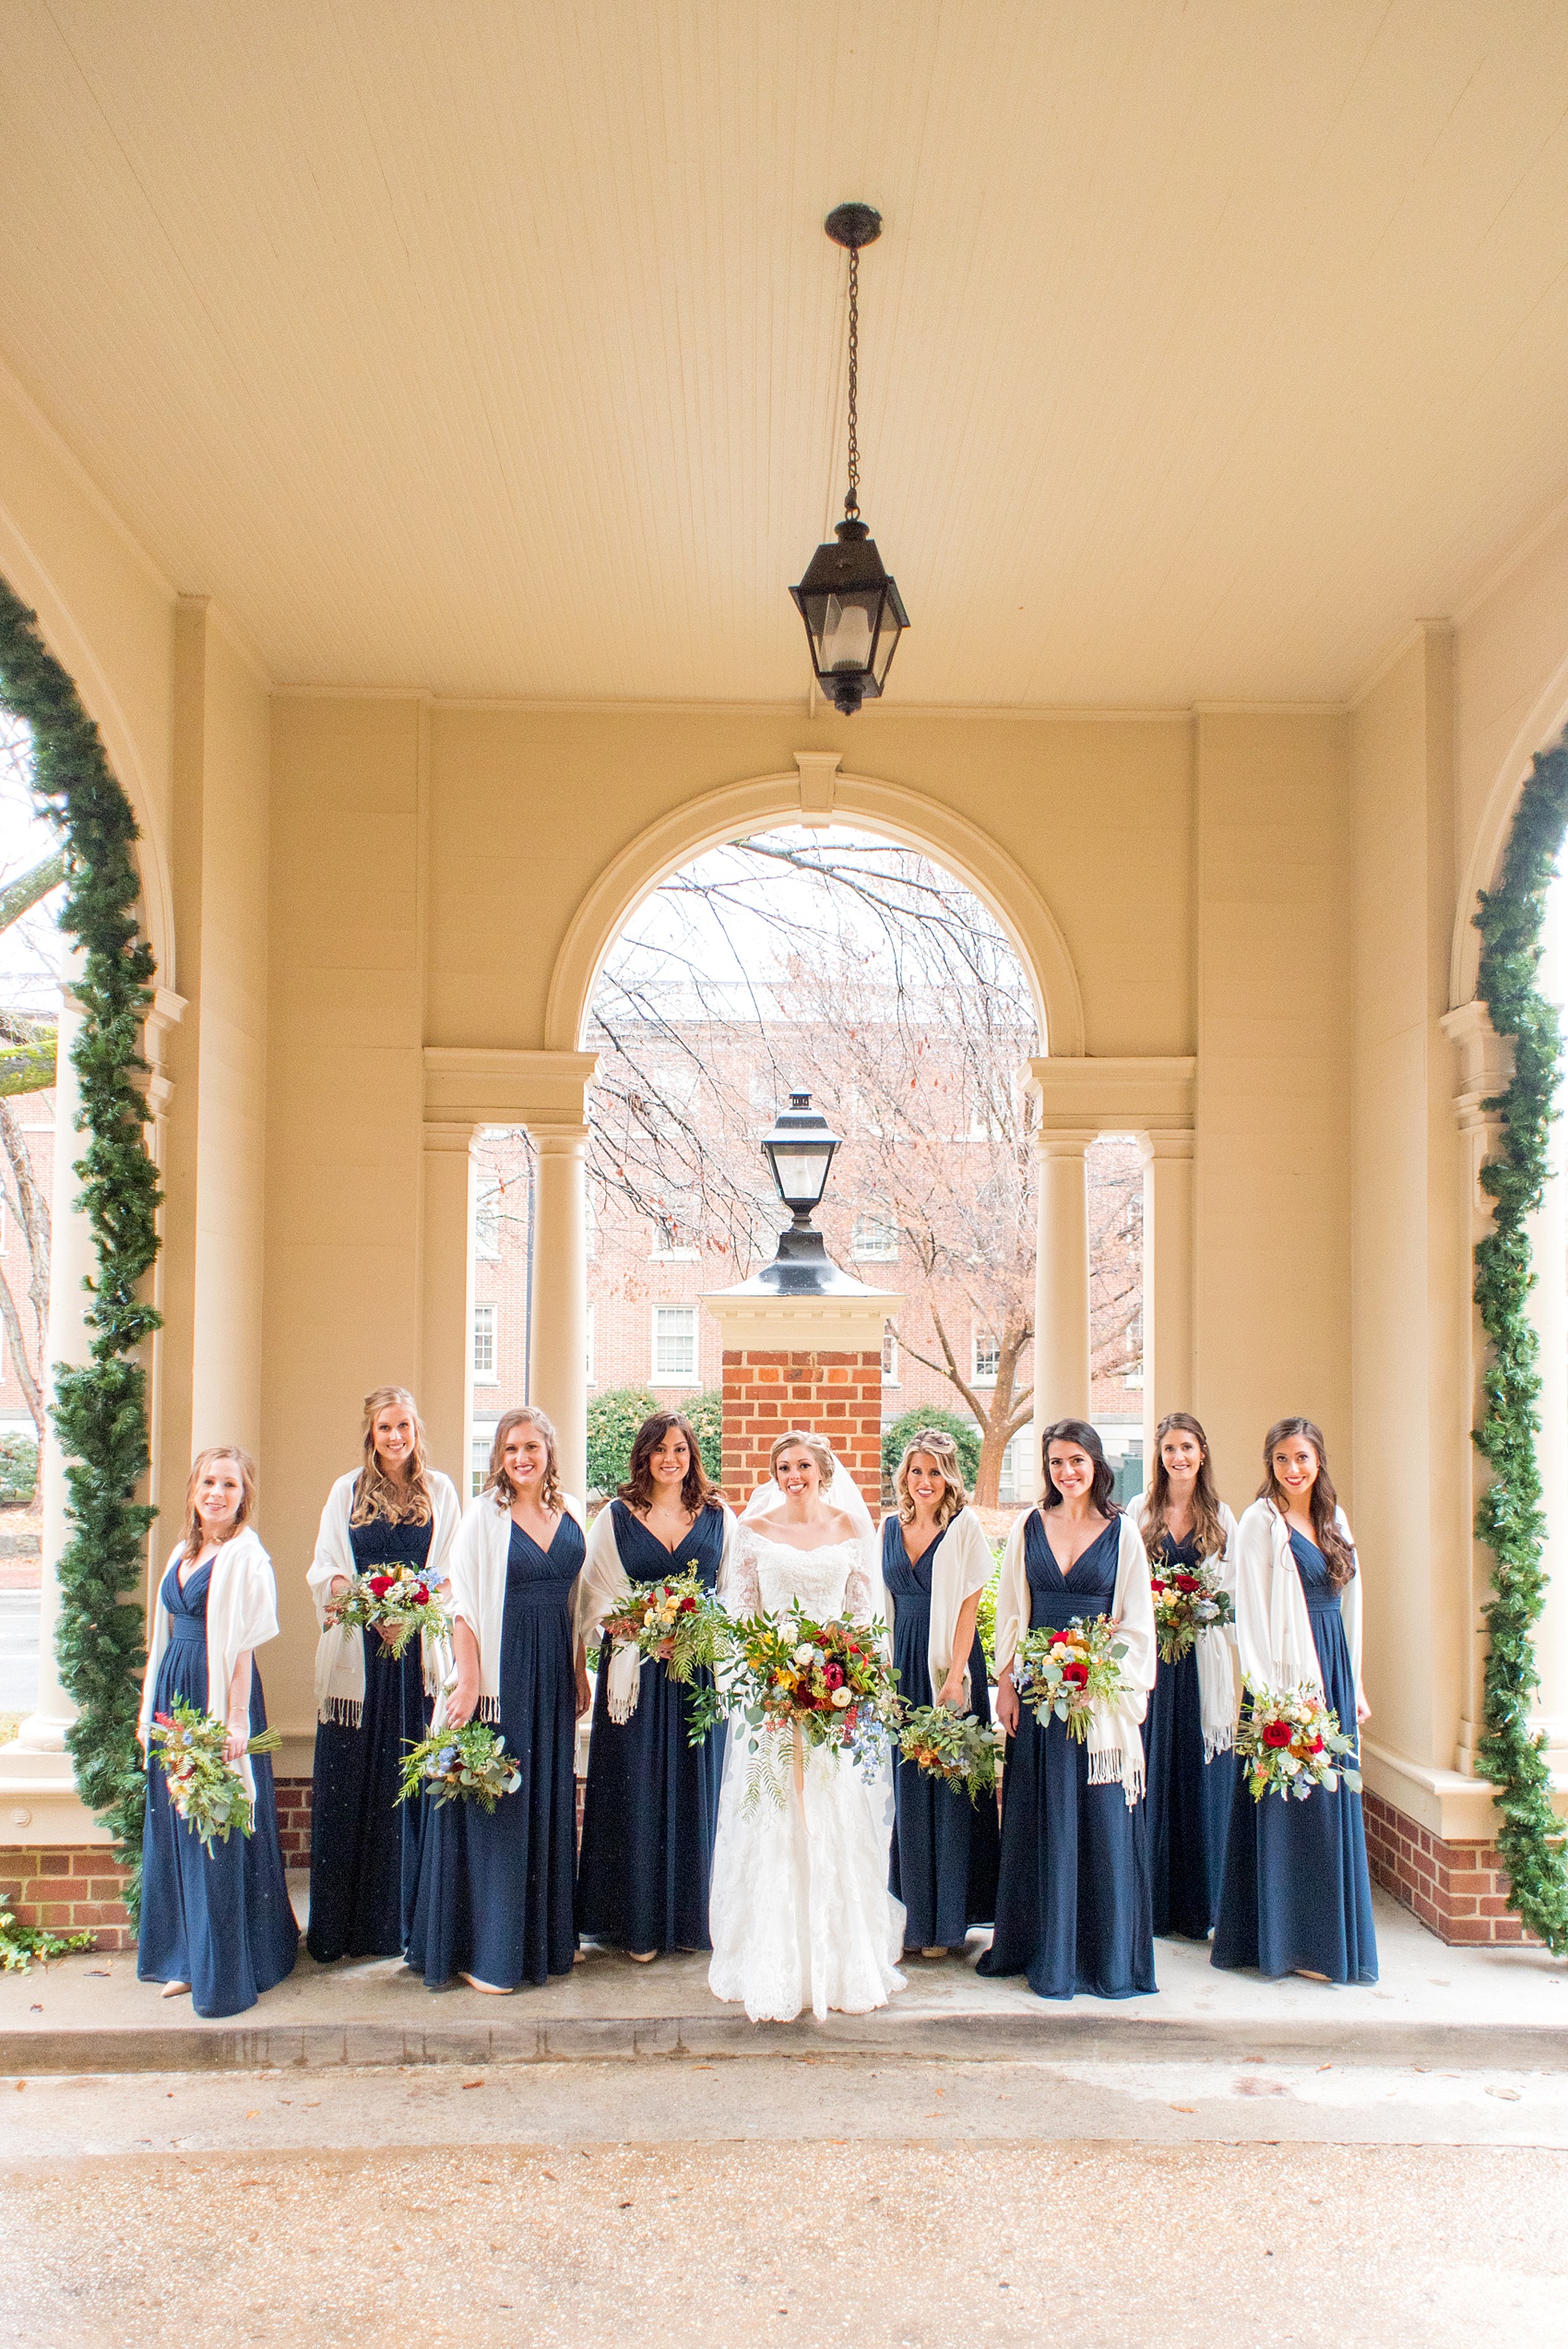 Beautiful wedding photos at The Carolina Inn at Chapel Hill, North Carolina by Mikkel Paige Photography. Photo of the bridal party in navy blue gowns with winter colorful bouquets and white shawls. Click through to see the rest of this gorgeous winter wedding! #thecarolinainn #snowywedding